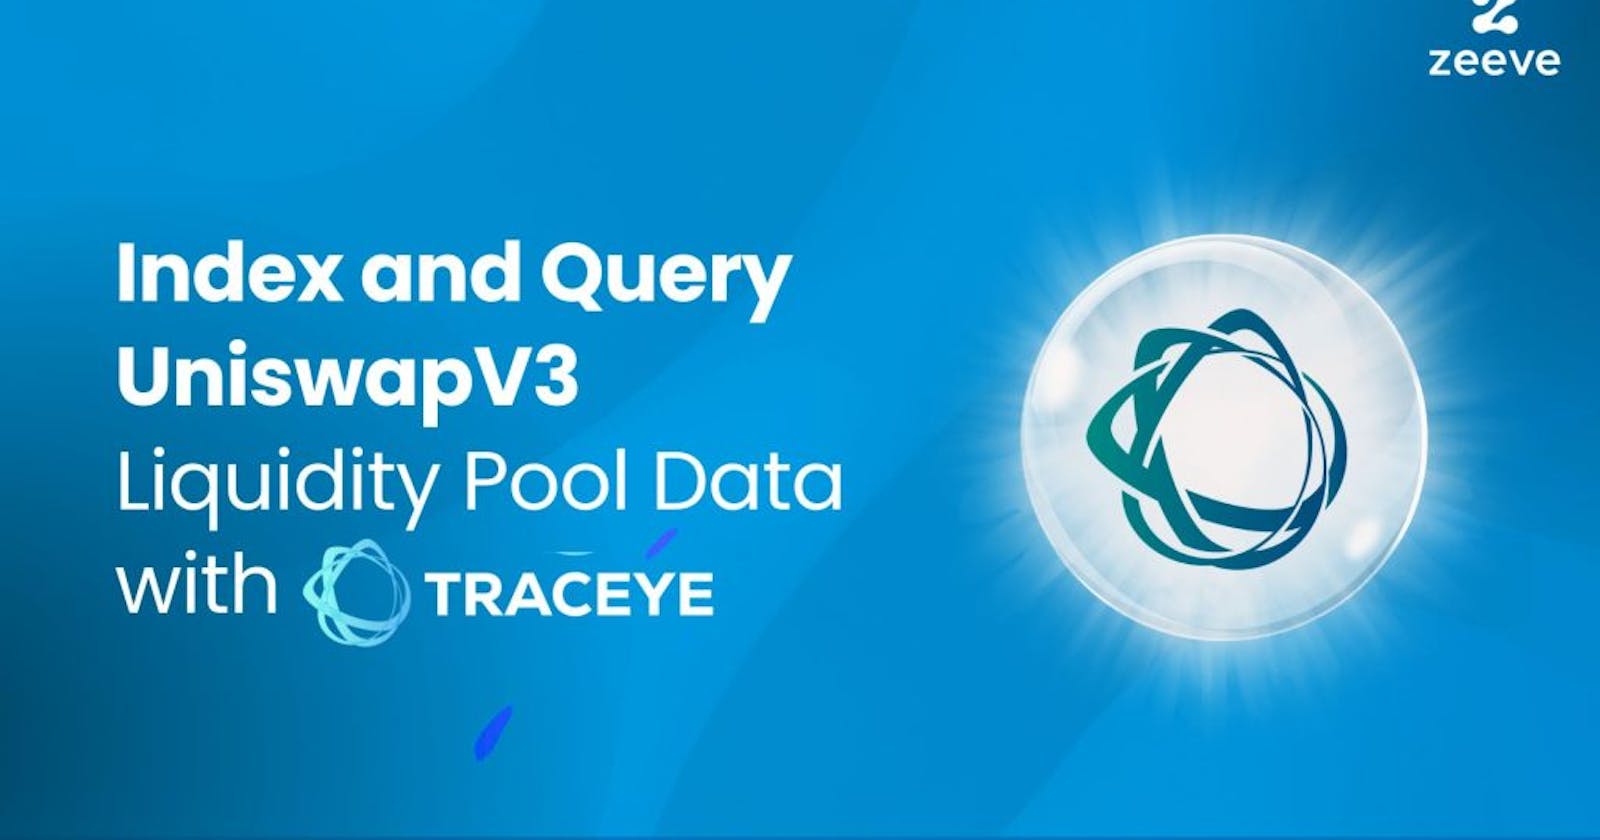 Index and Query UniswapV3 Liquidity Pool Data with Traceye